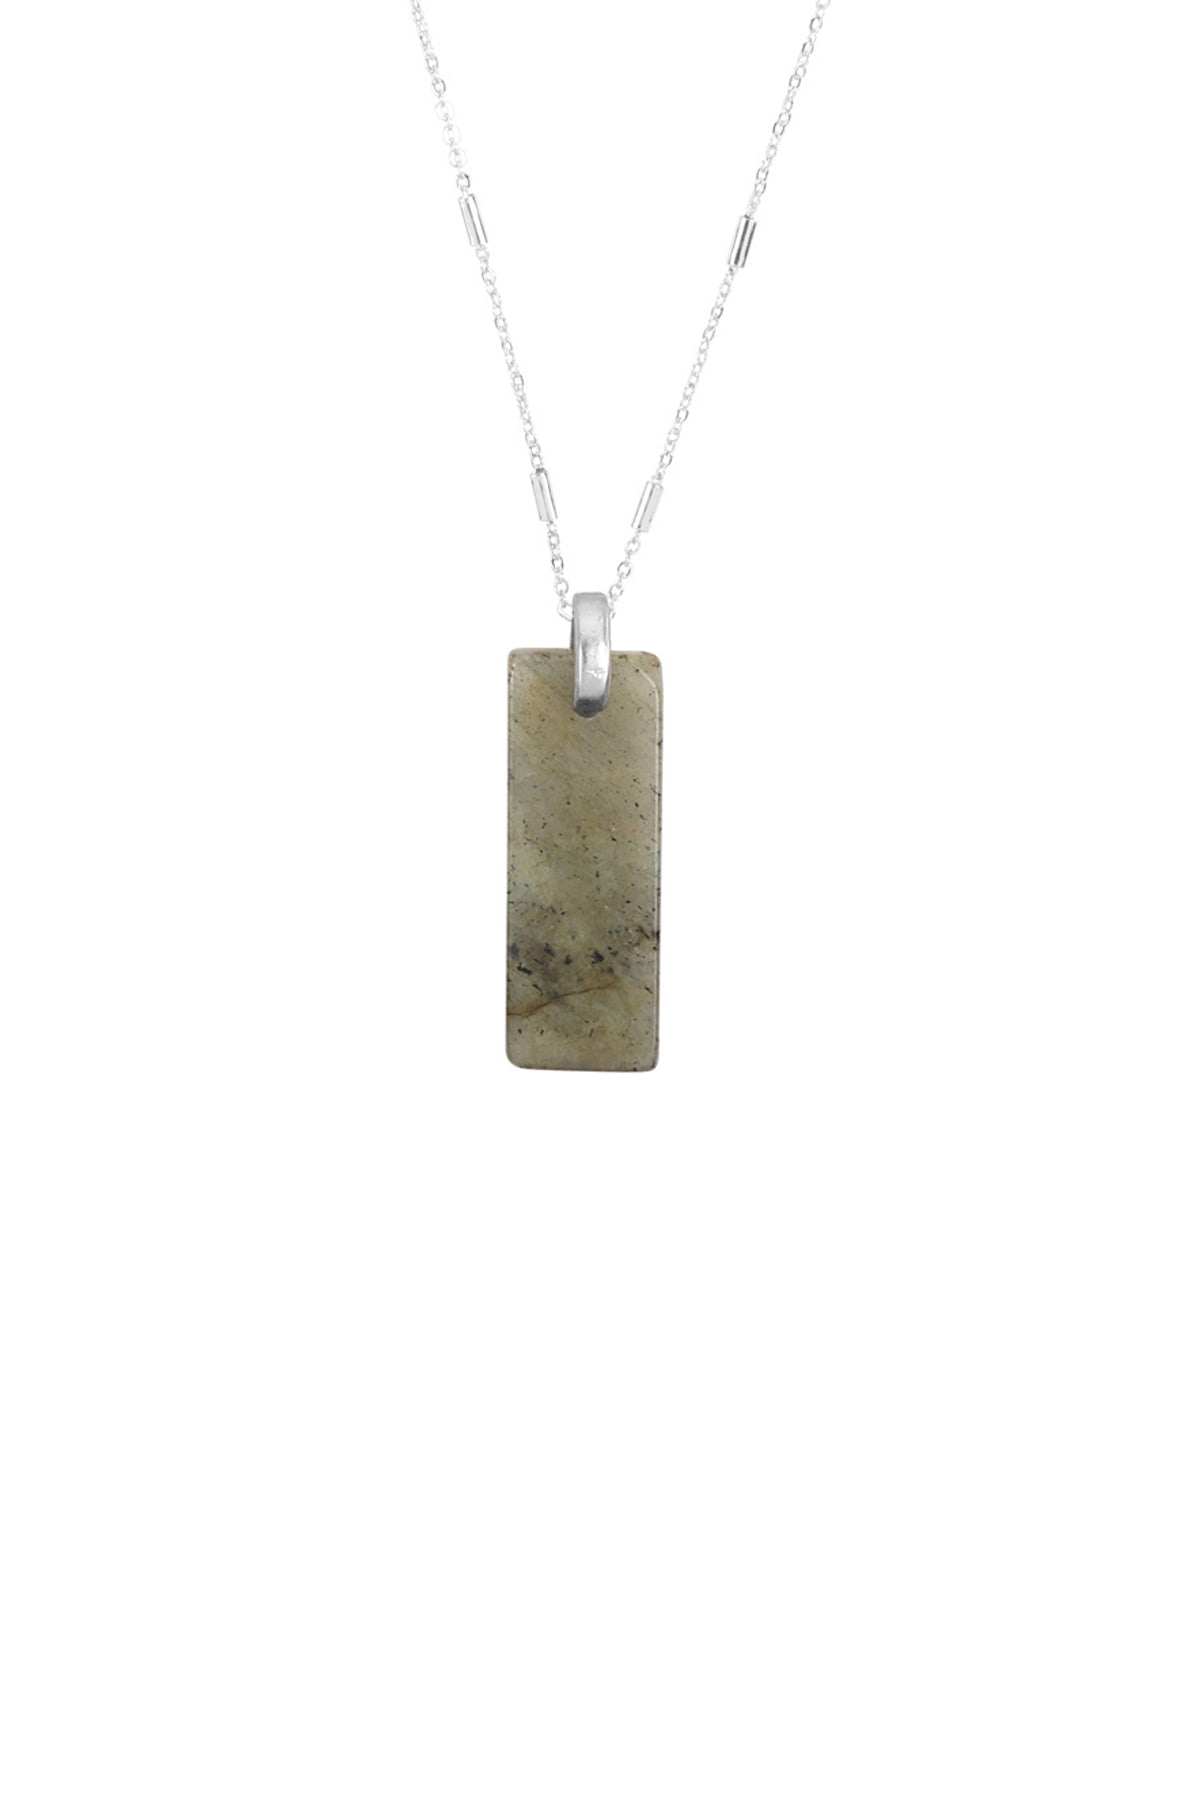 2 LAYERED BAR METAL STONE PENDANT NECKLACE/6PCS (NOW $1.25 ONLY!)